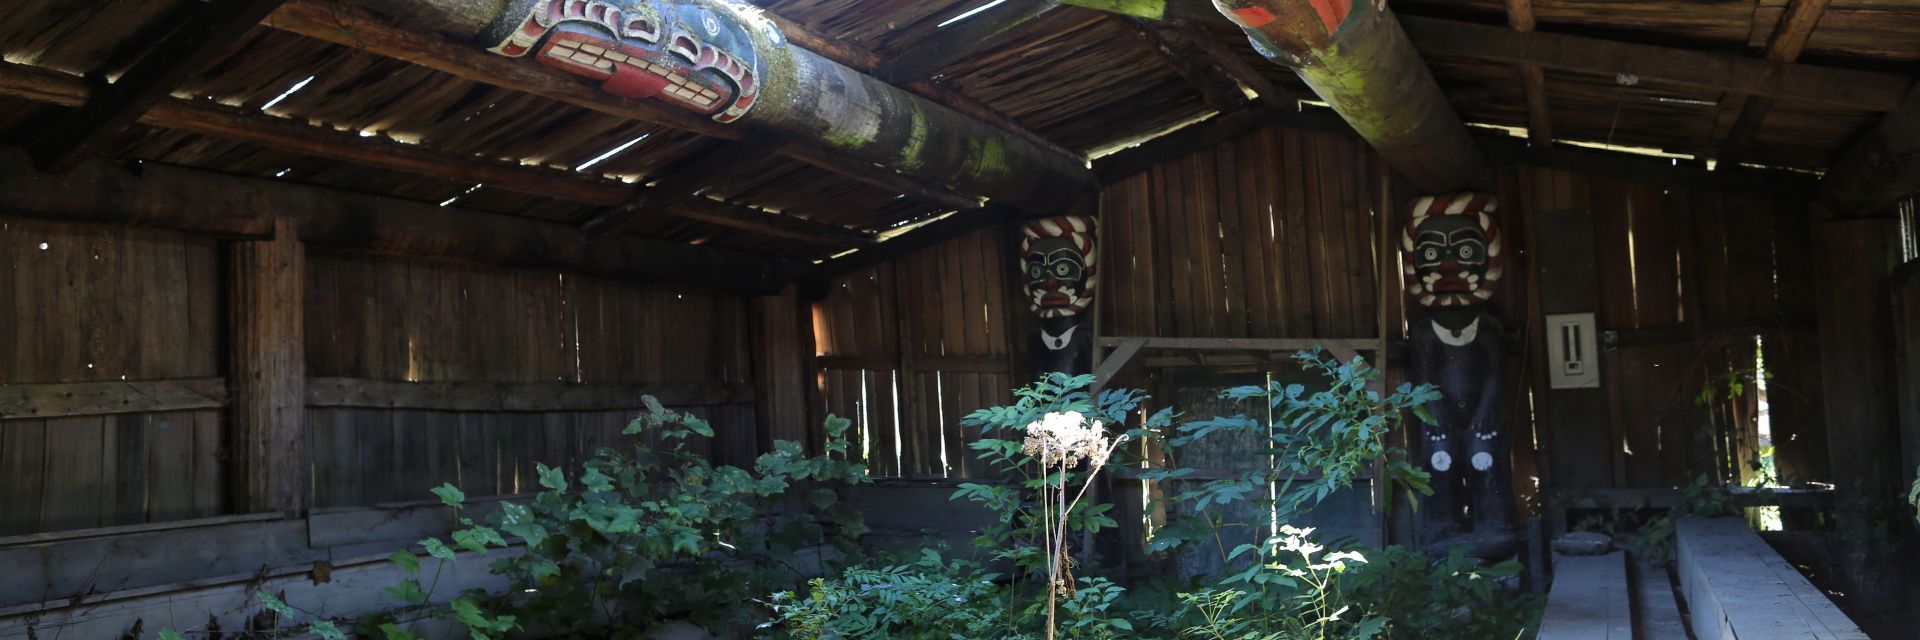 The interior view of an indoor garden inside an Indigenous structure